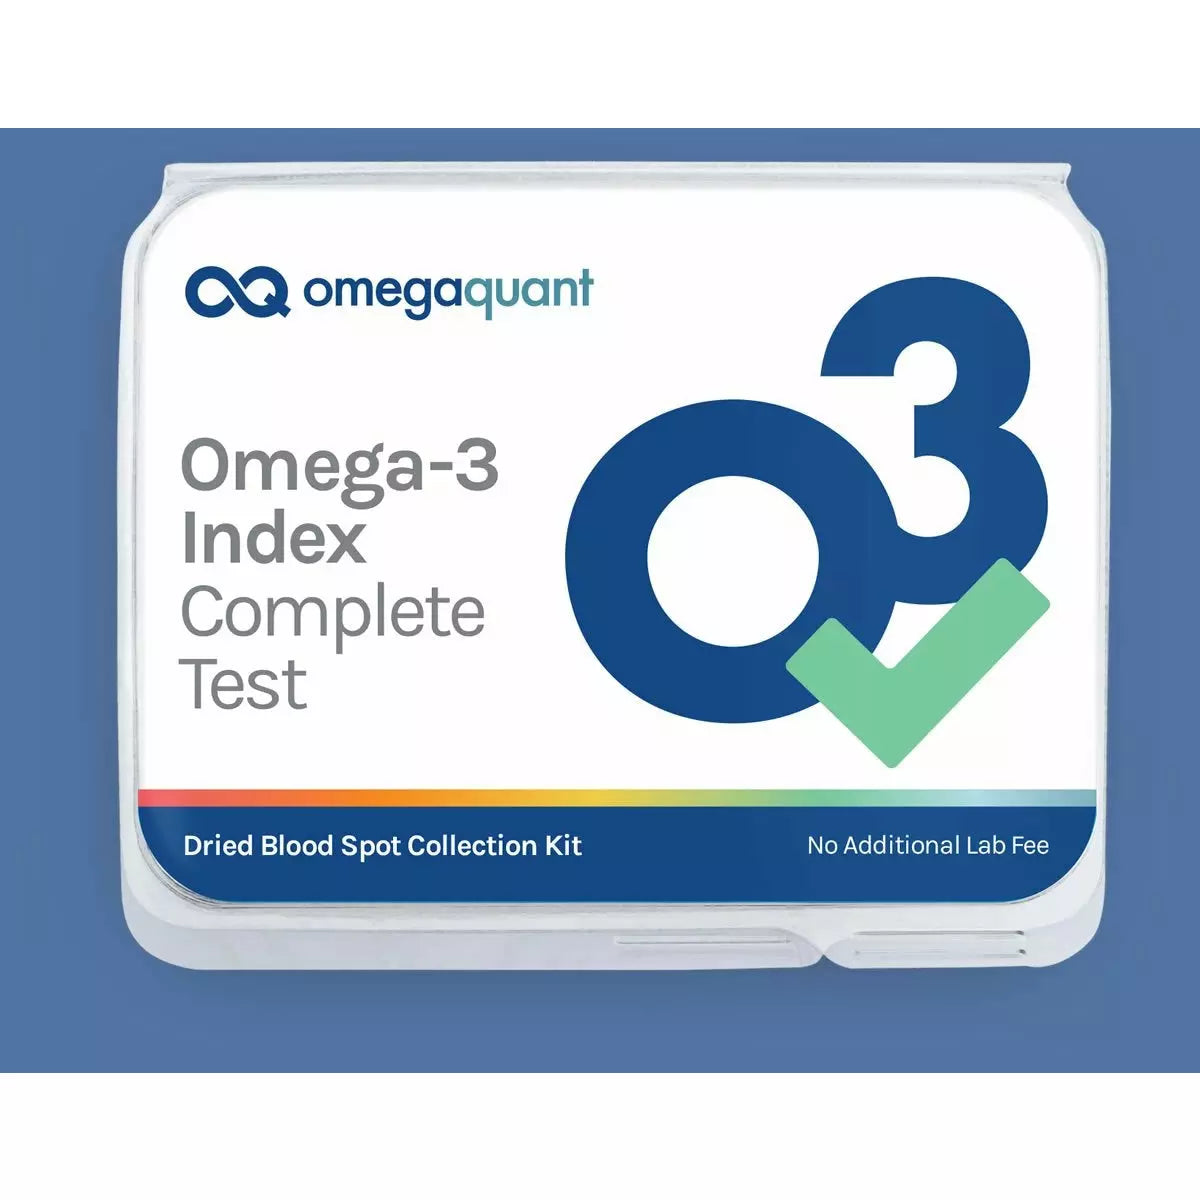 Omega-3 Index Complete Test (DARK BLUE BOX) Simple finger poke. No blood draw needed. Collect your sample at home. Test kit